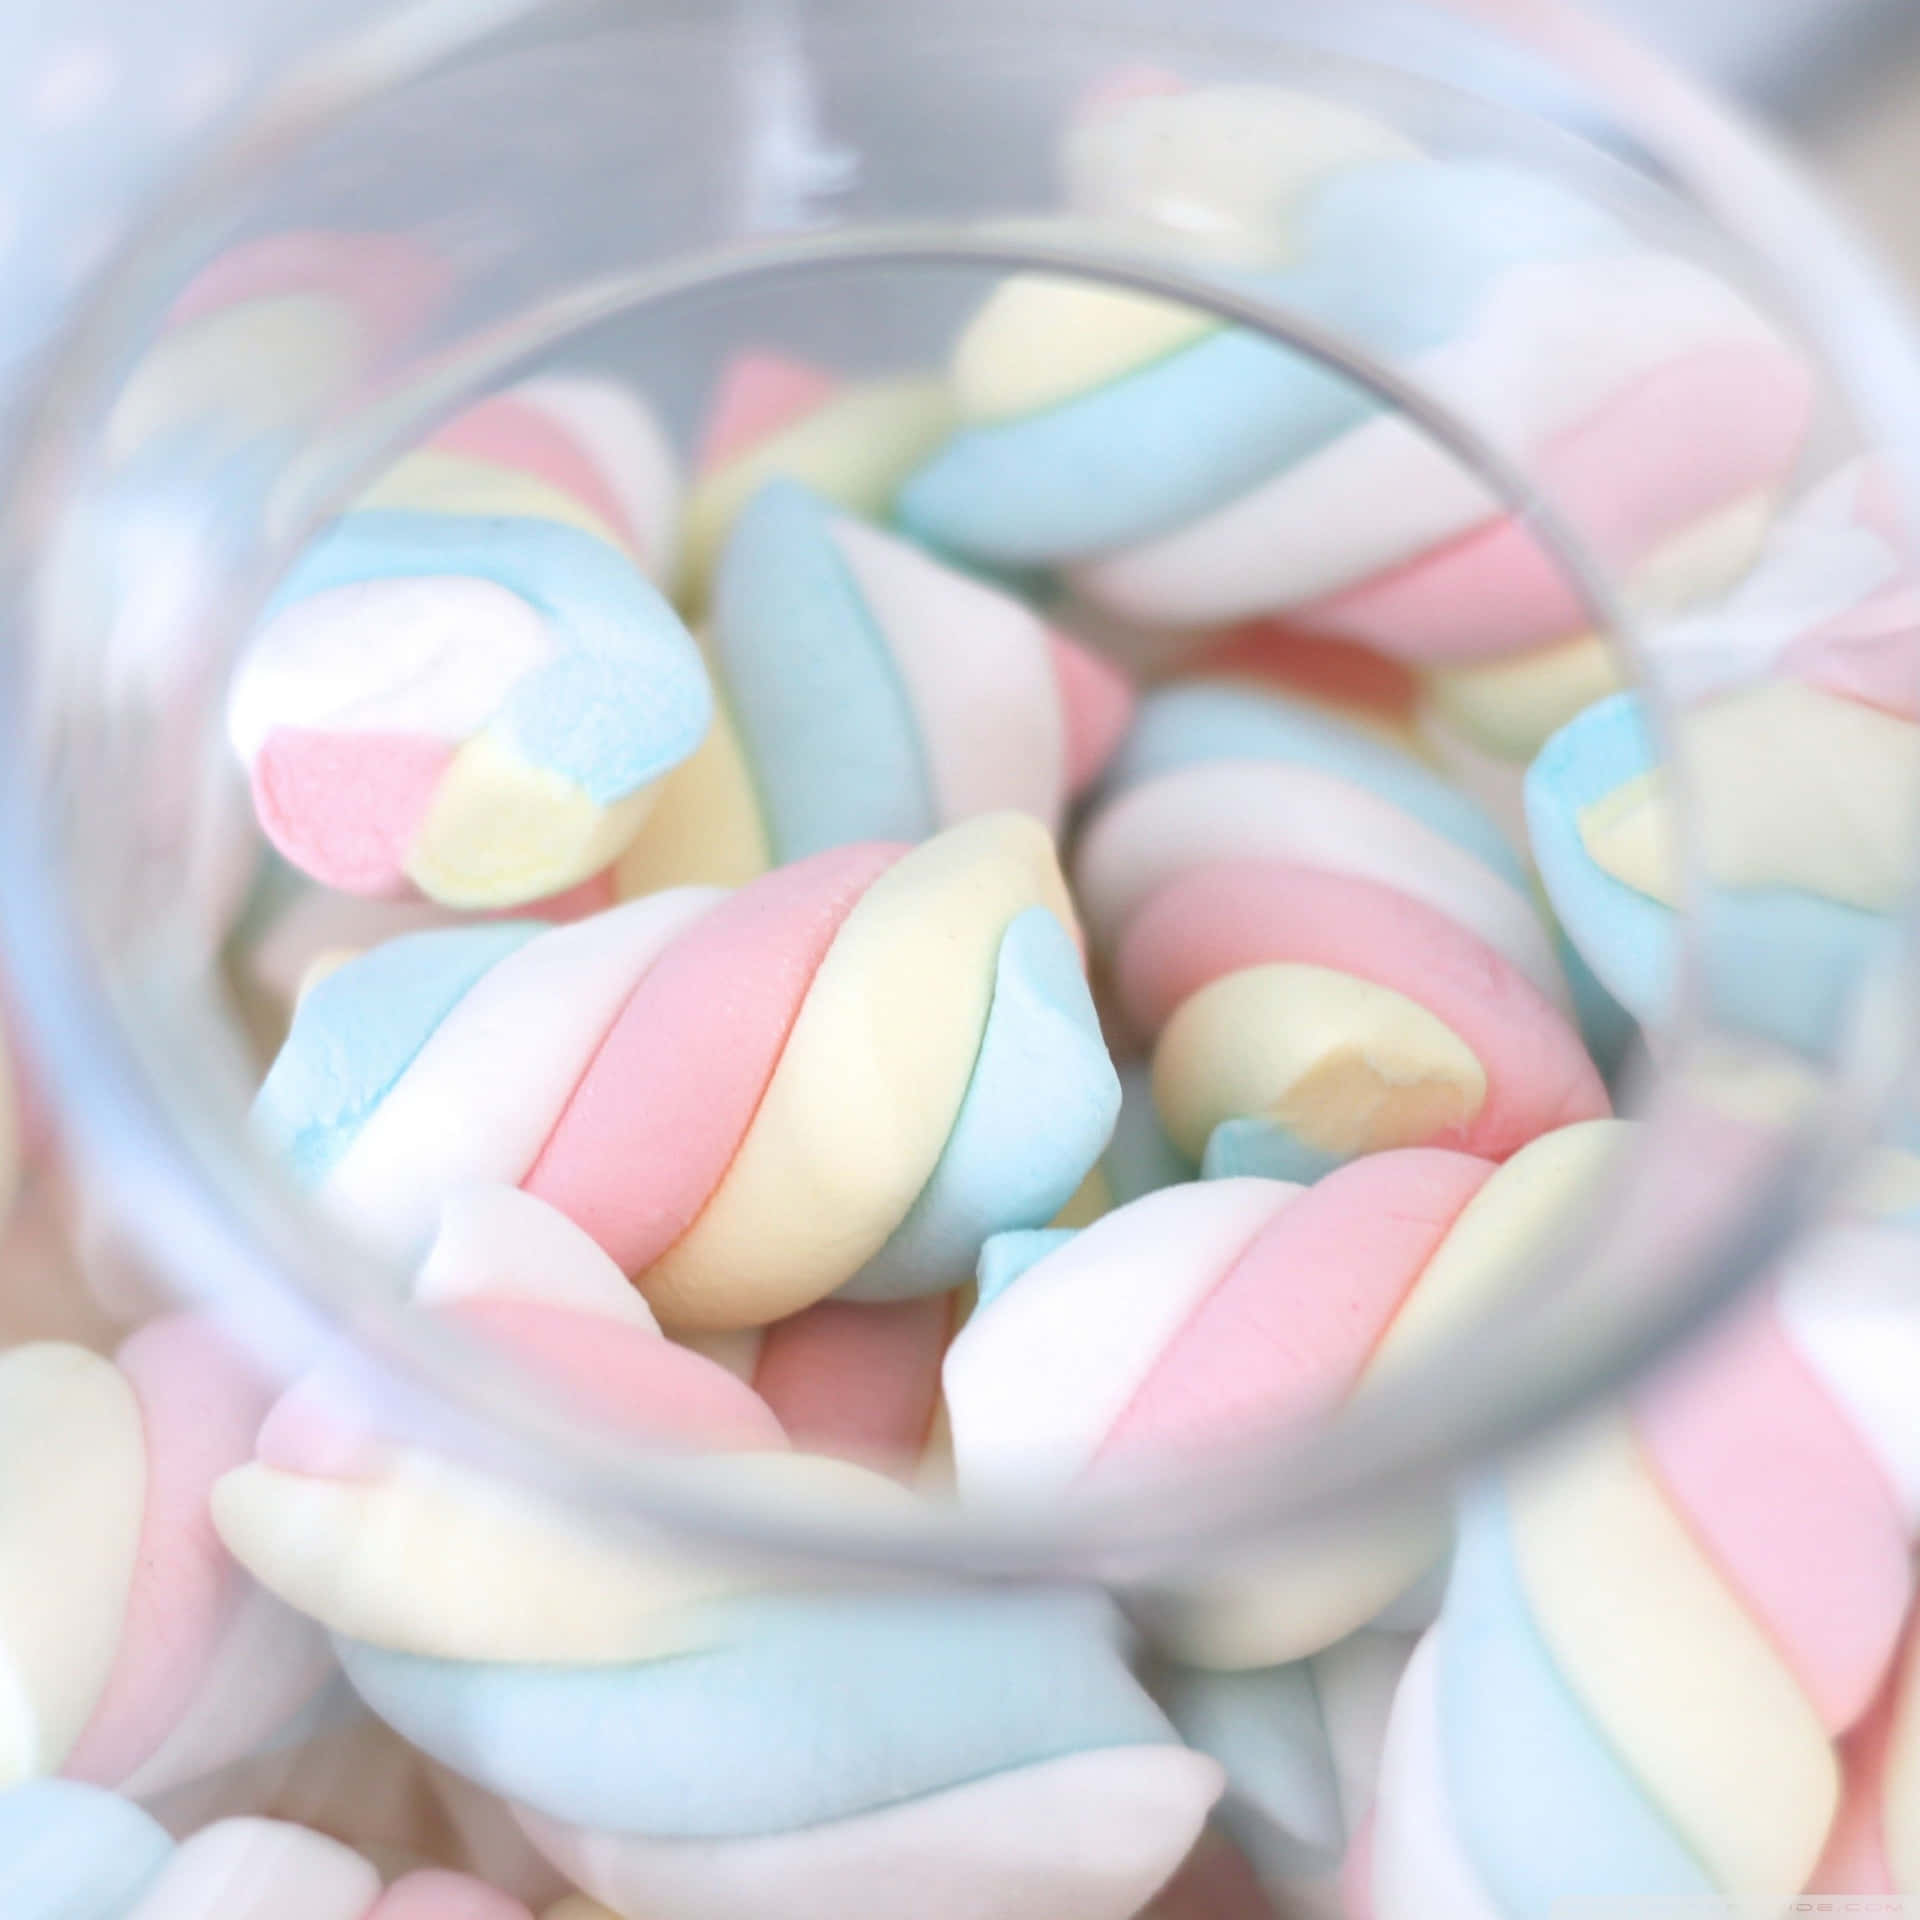 A Glass Bowl Filled With Colorful Marshmallows